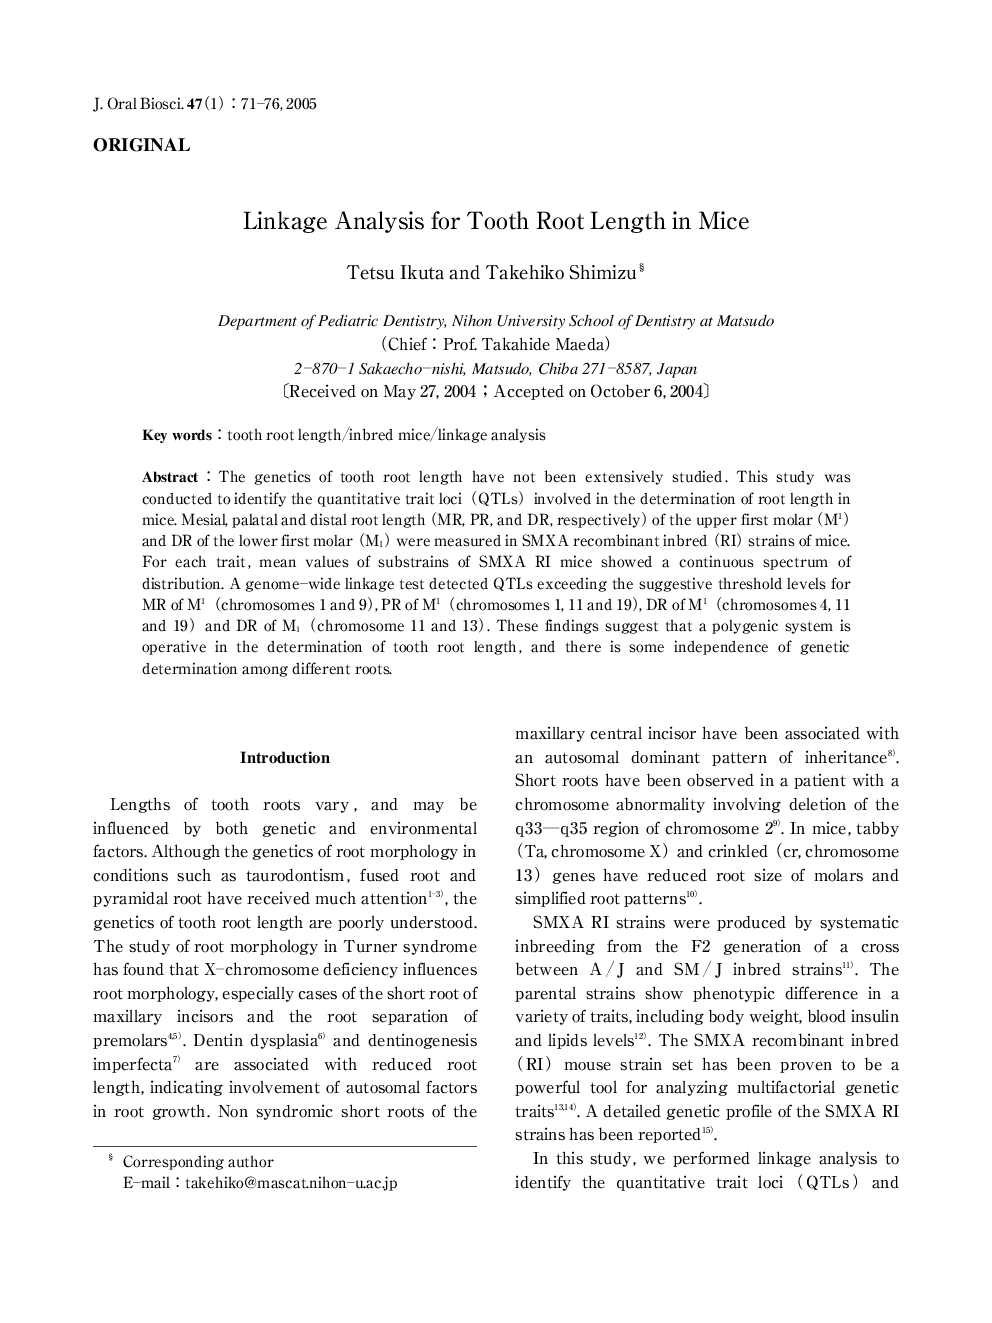 Linkage Analysis for Tooth Root Length in Mice